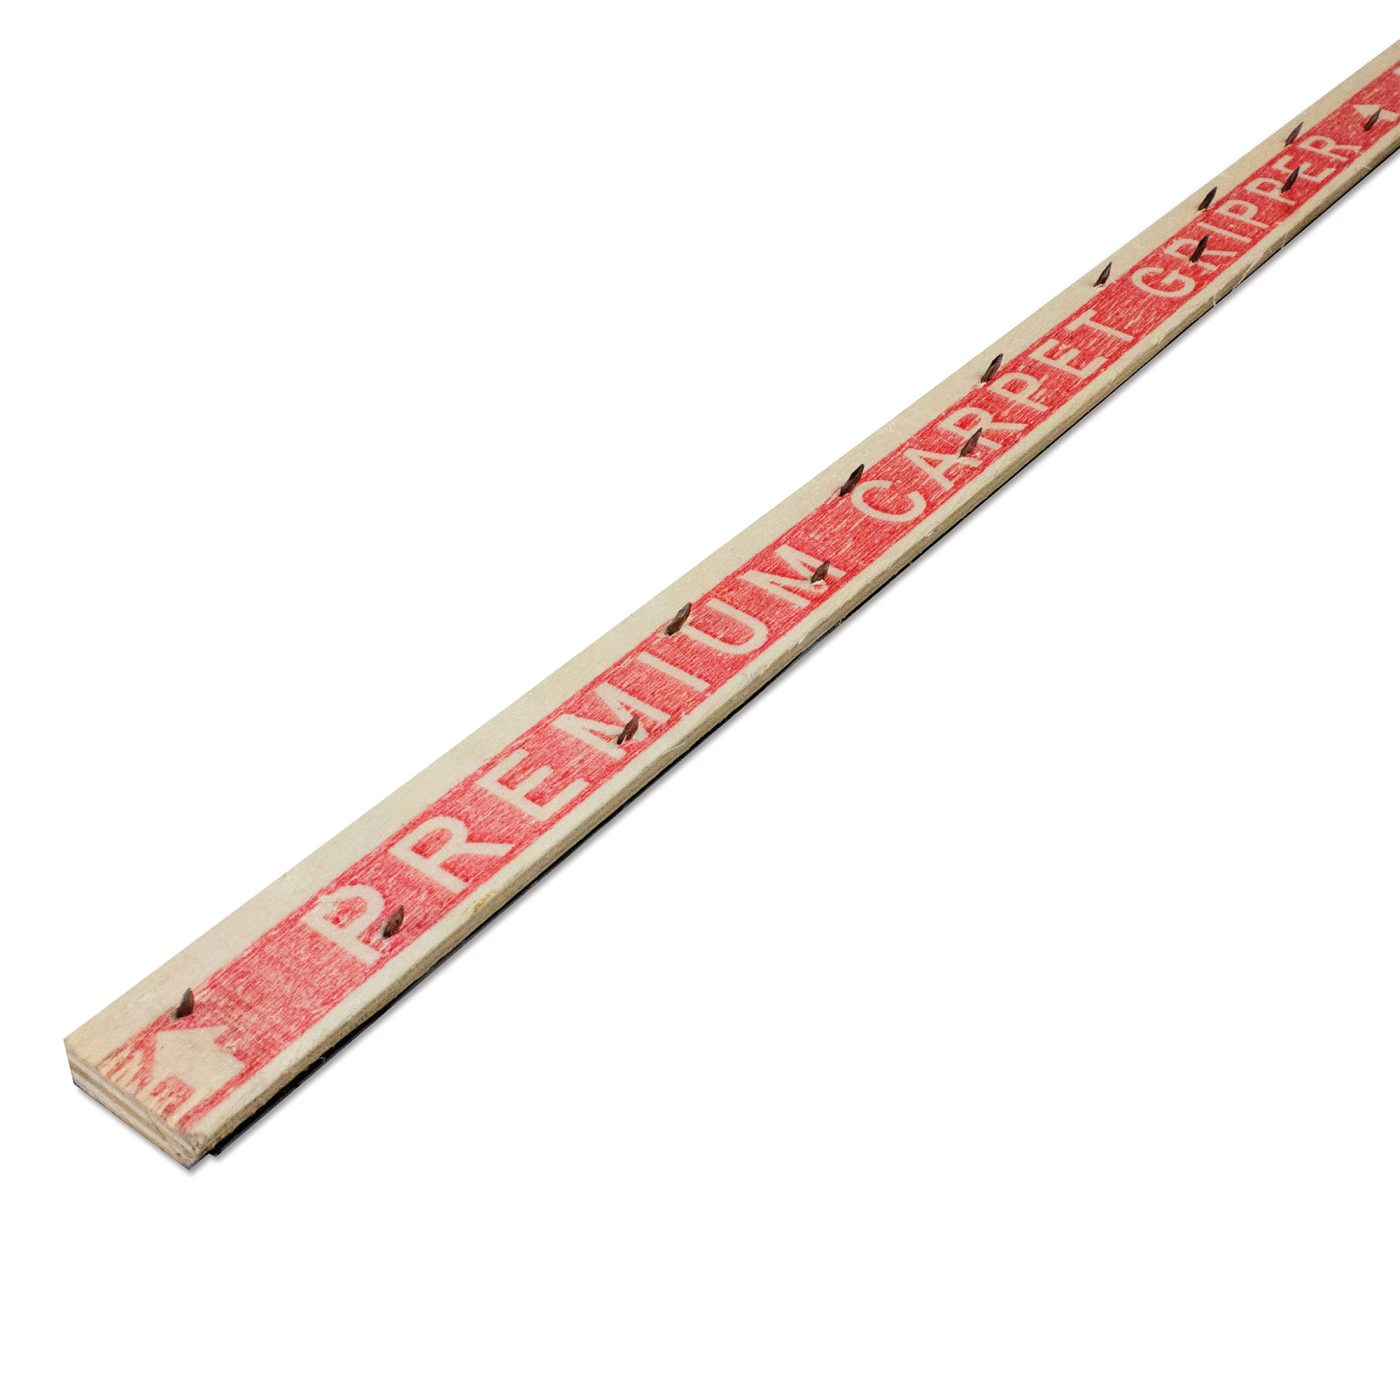 https://www.robertsconsolidated.com/wp-content/uploads/2023/07/ROBERTS_Peel-and-Stick-Tack-Strip_20-1450_Product-Image-scaled.jpg